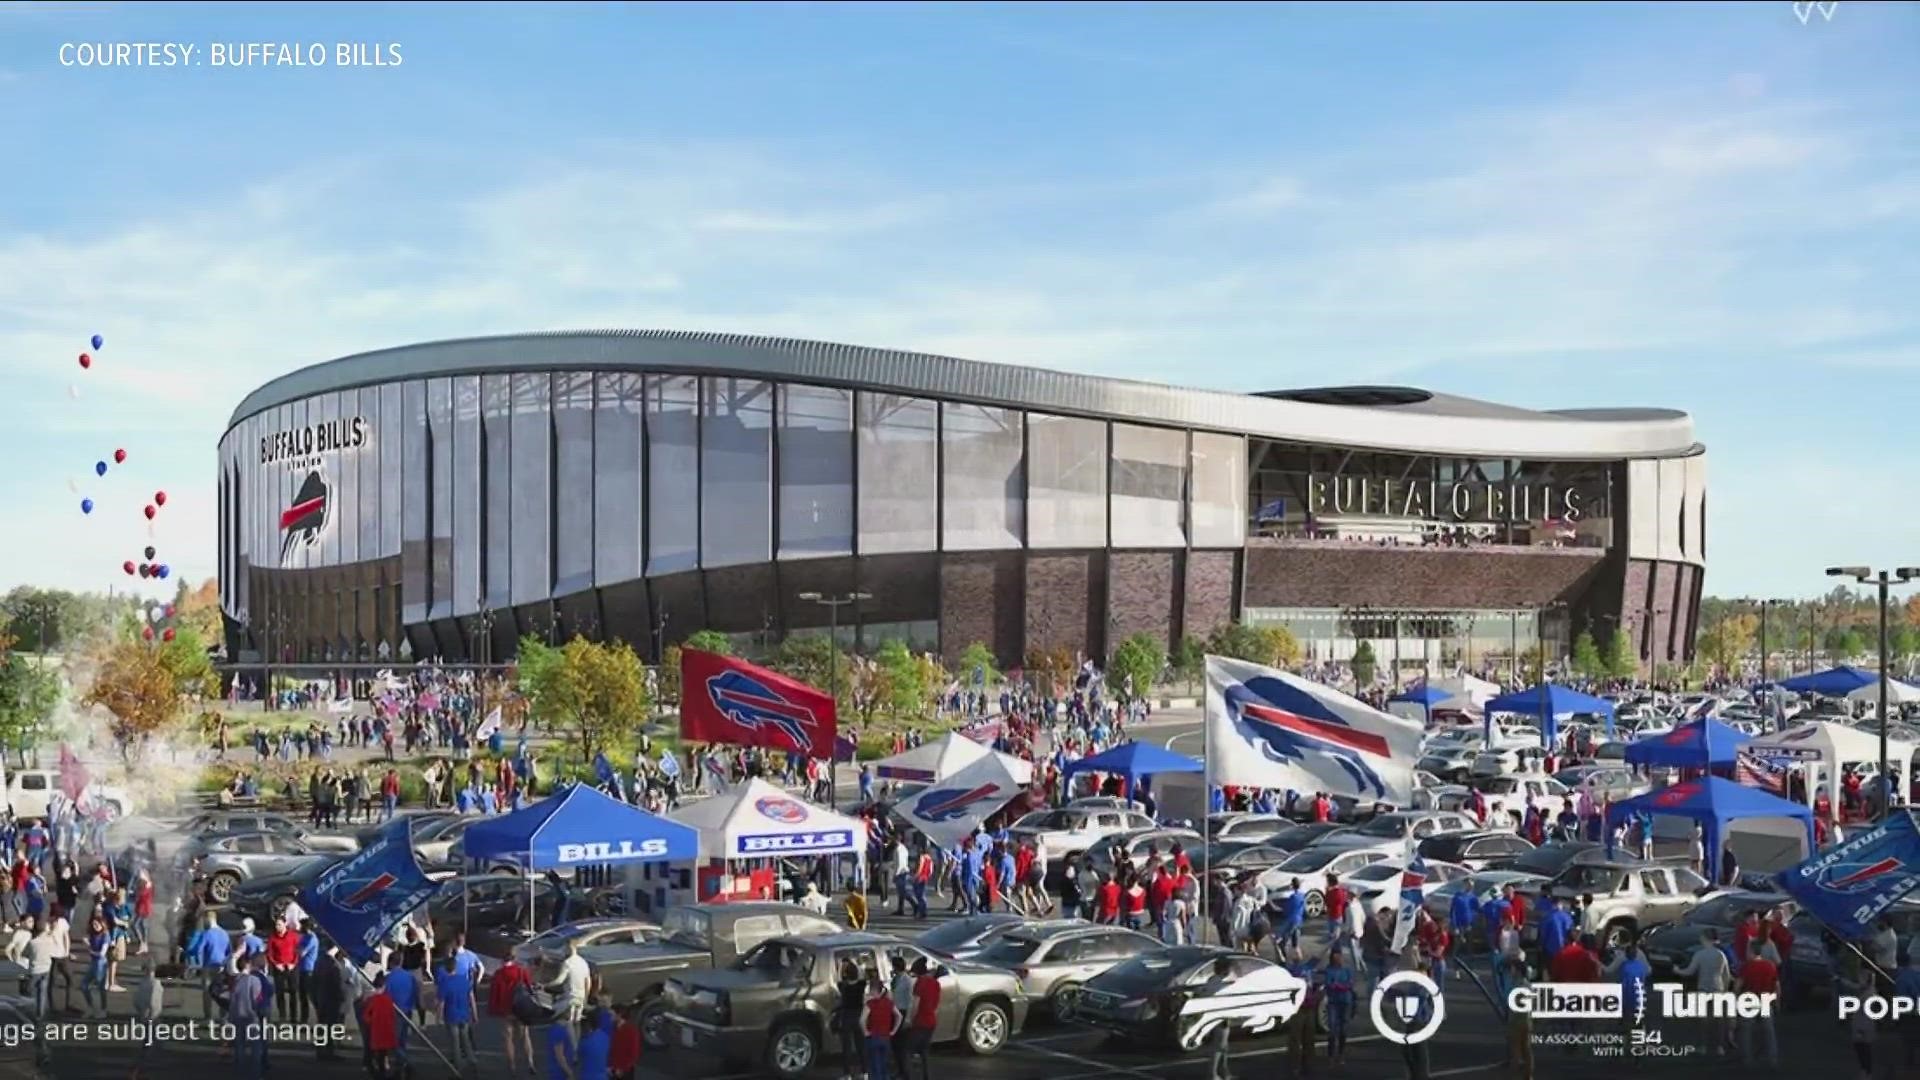 THE BILLS RELEASED THESE NEW RENDERINGS OF THE FUTURE STADIUM.